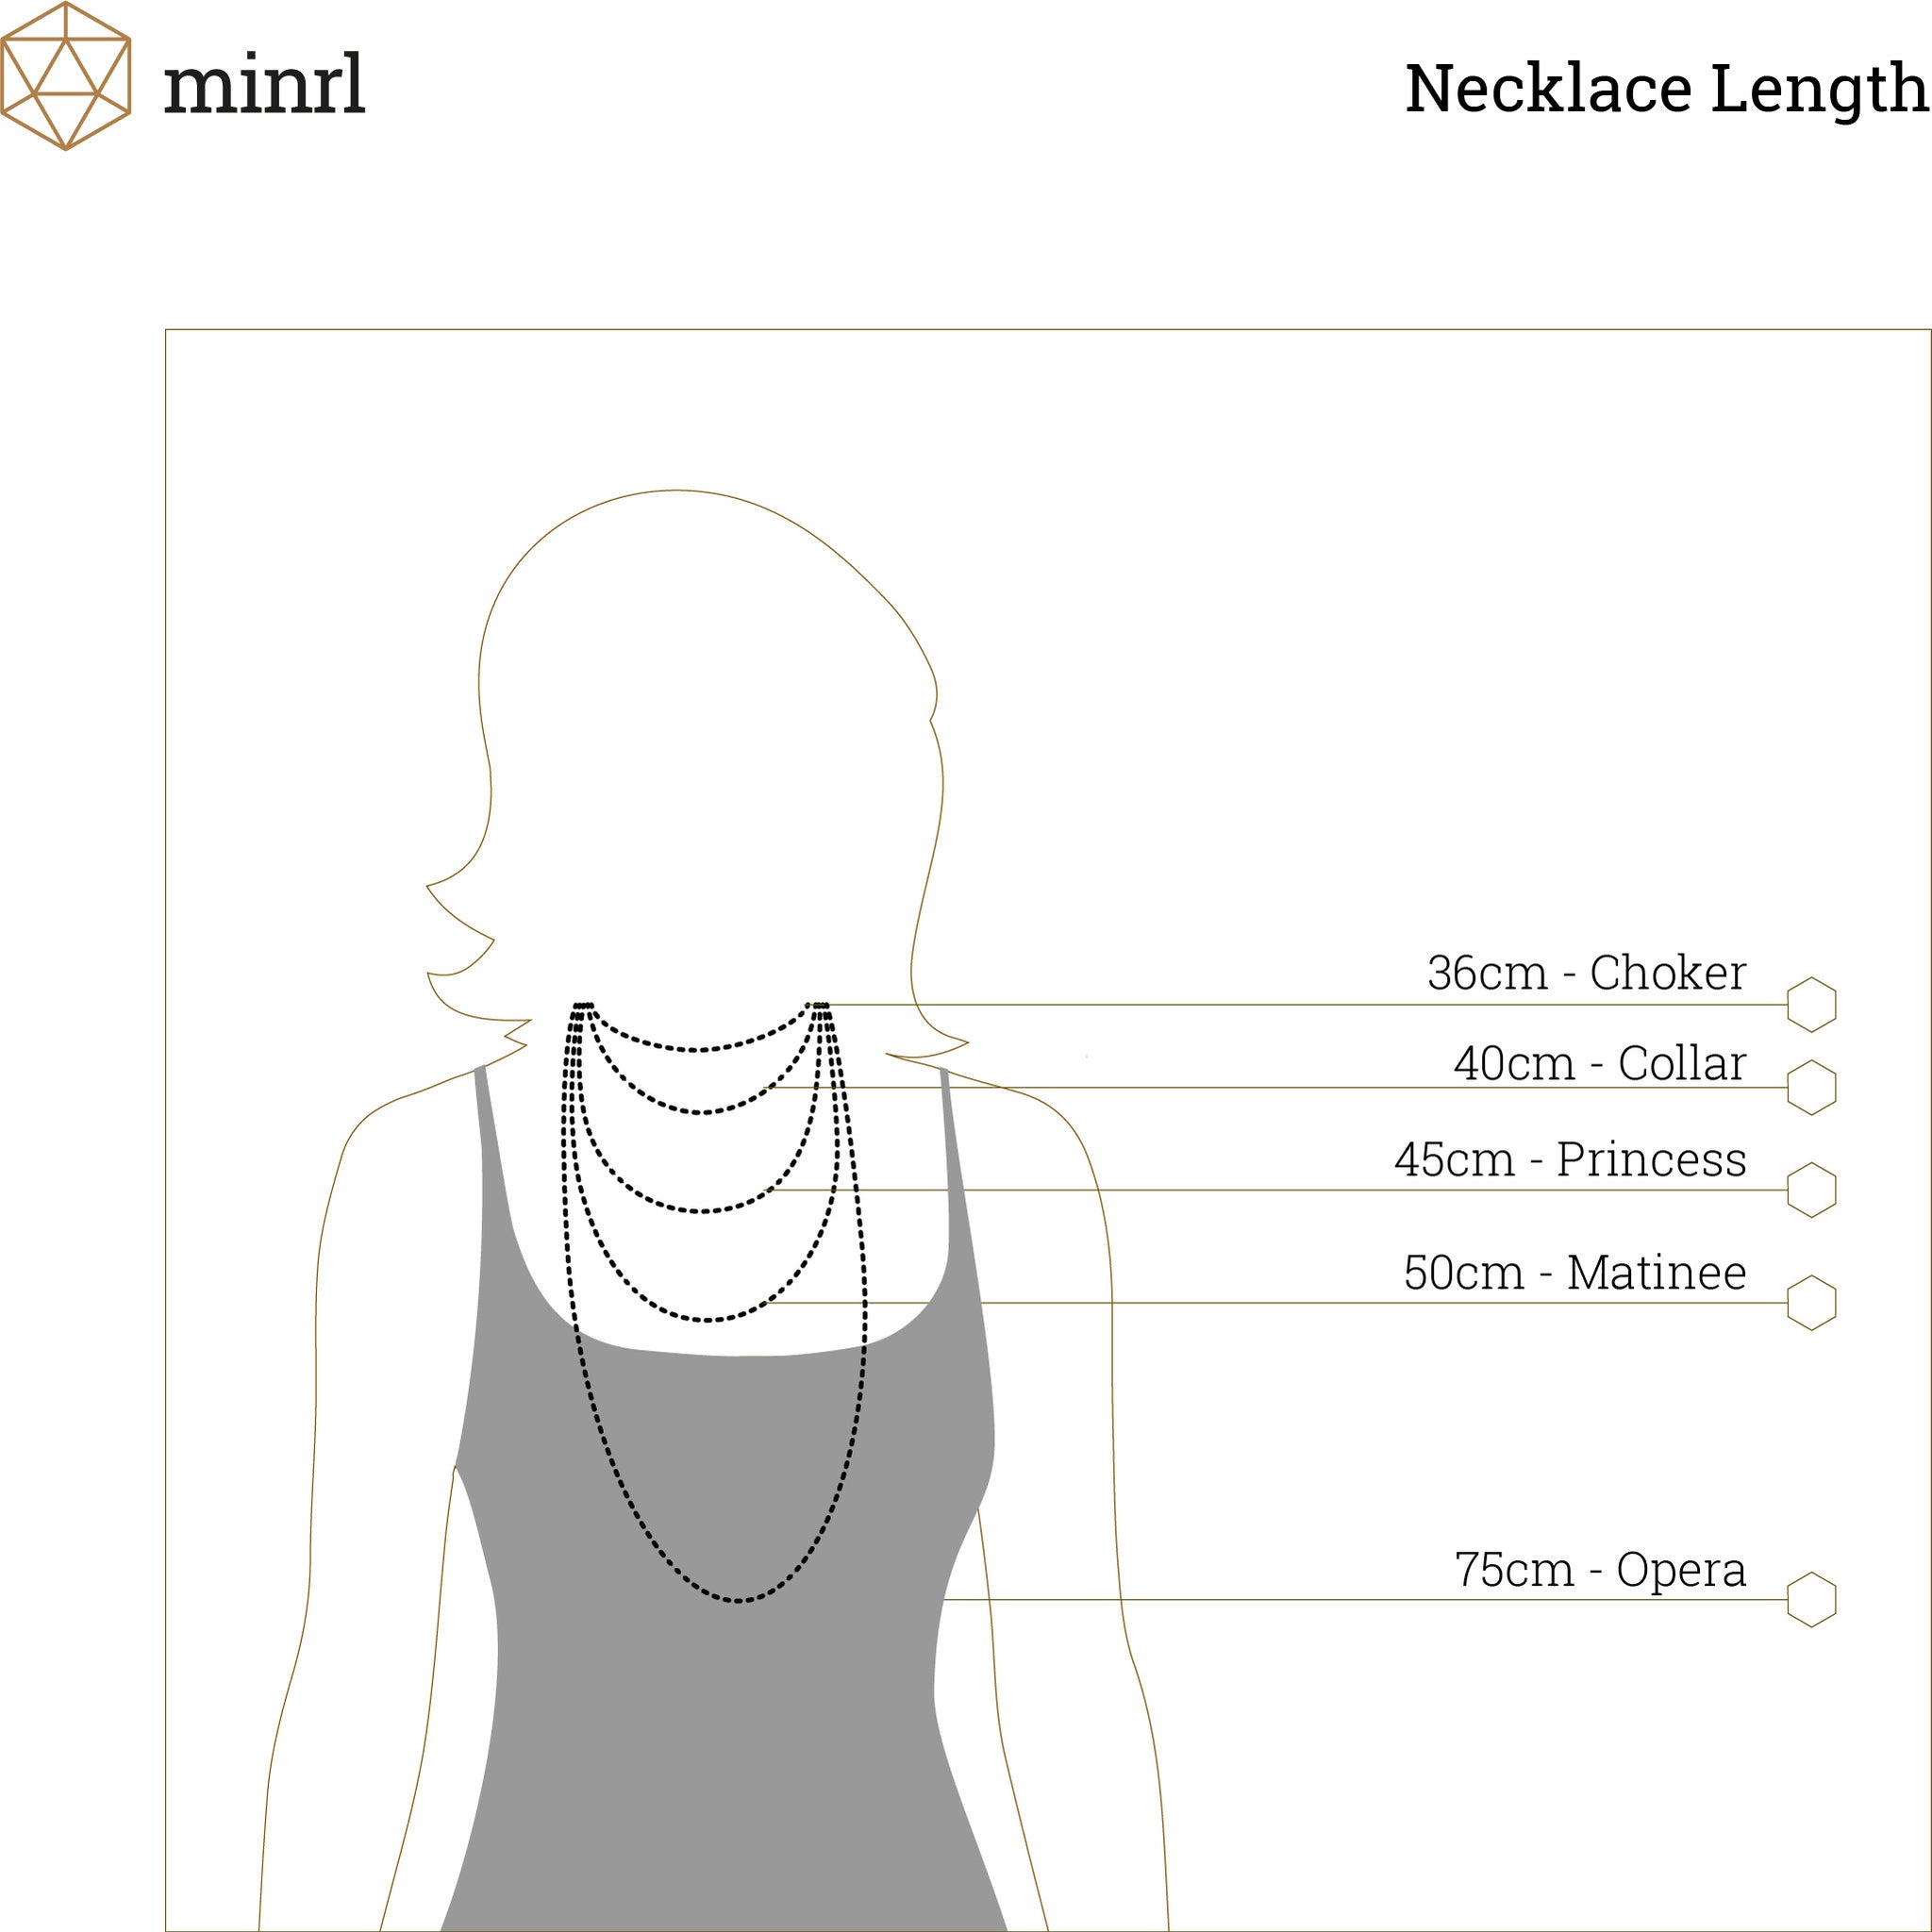 minrl necklace length chart